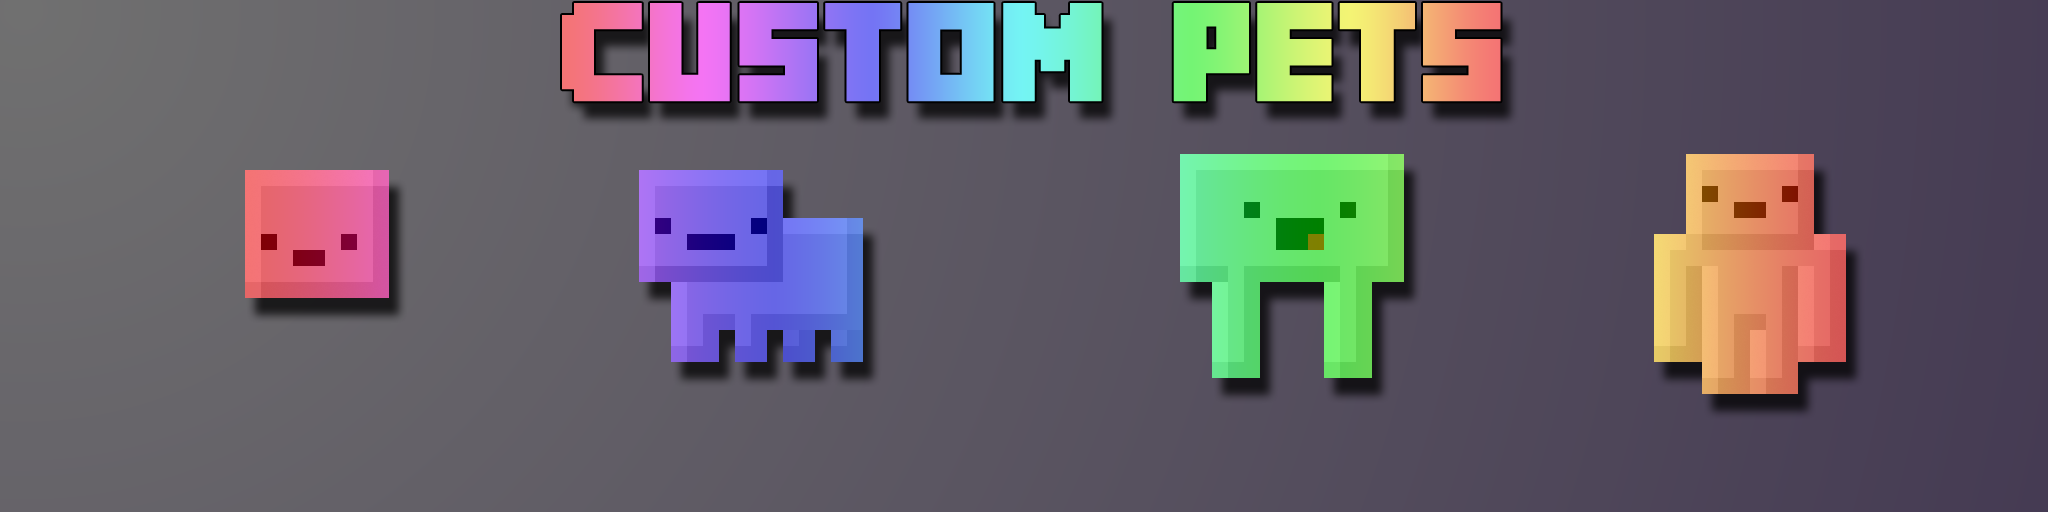 Custom Pets Make Your Own Custom Inventory Pets Dynamic In Game Customization Minecraft Mods Mapping And Modding Java Edition Minecraft Forum Minecraft Forum